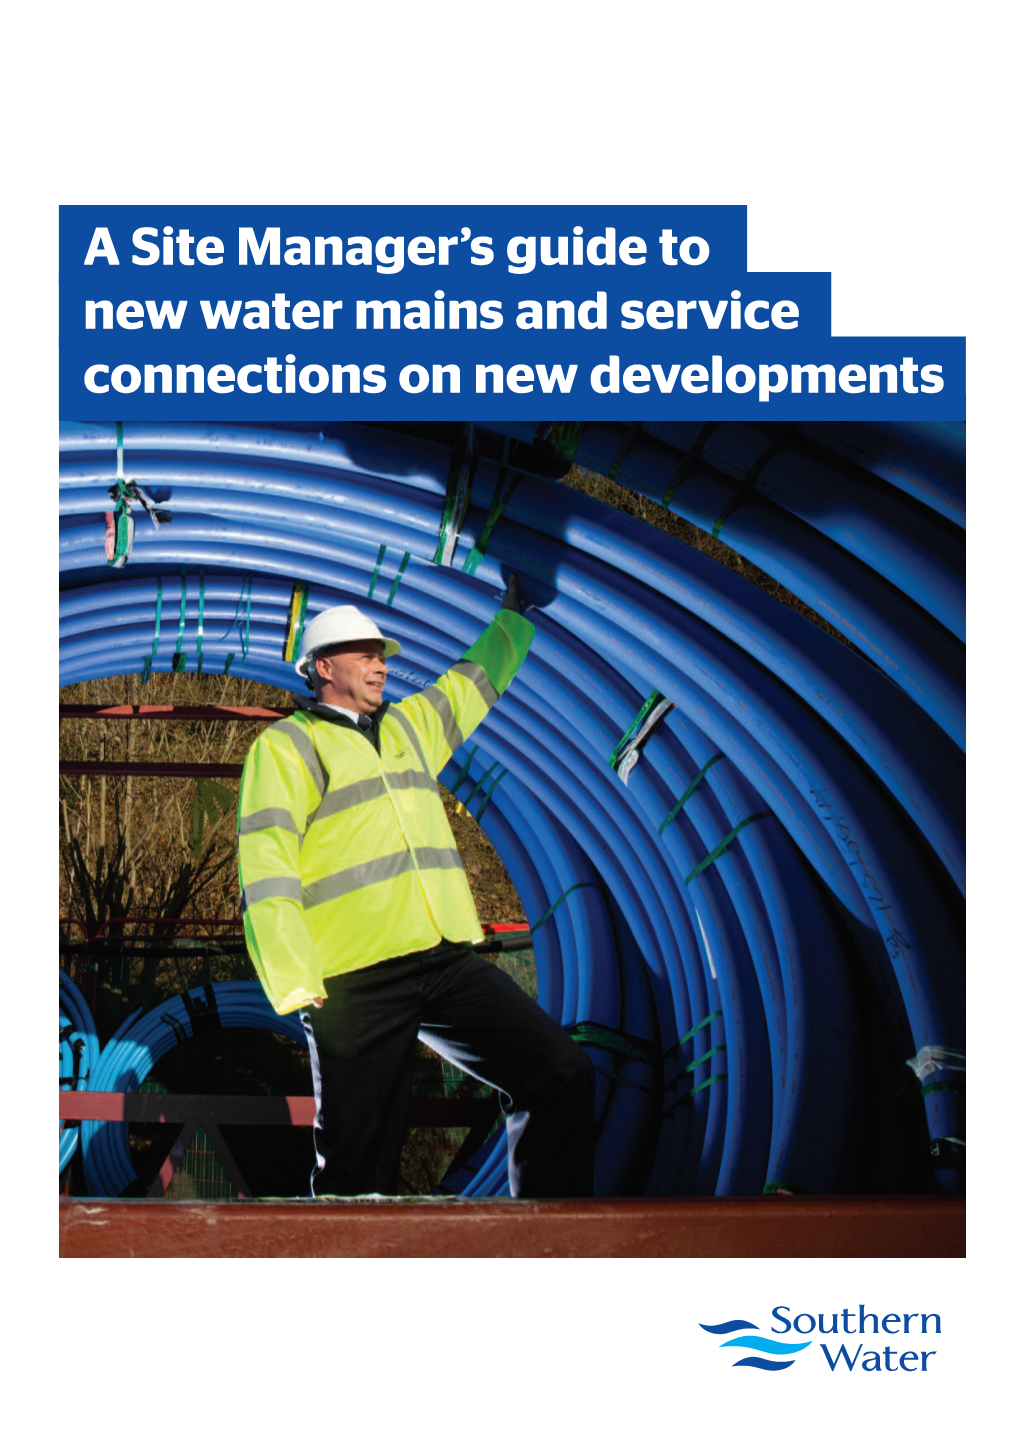 A Site Manager's Guide to New Water Mains and Service Connections on New Developments